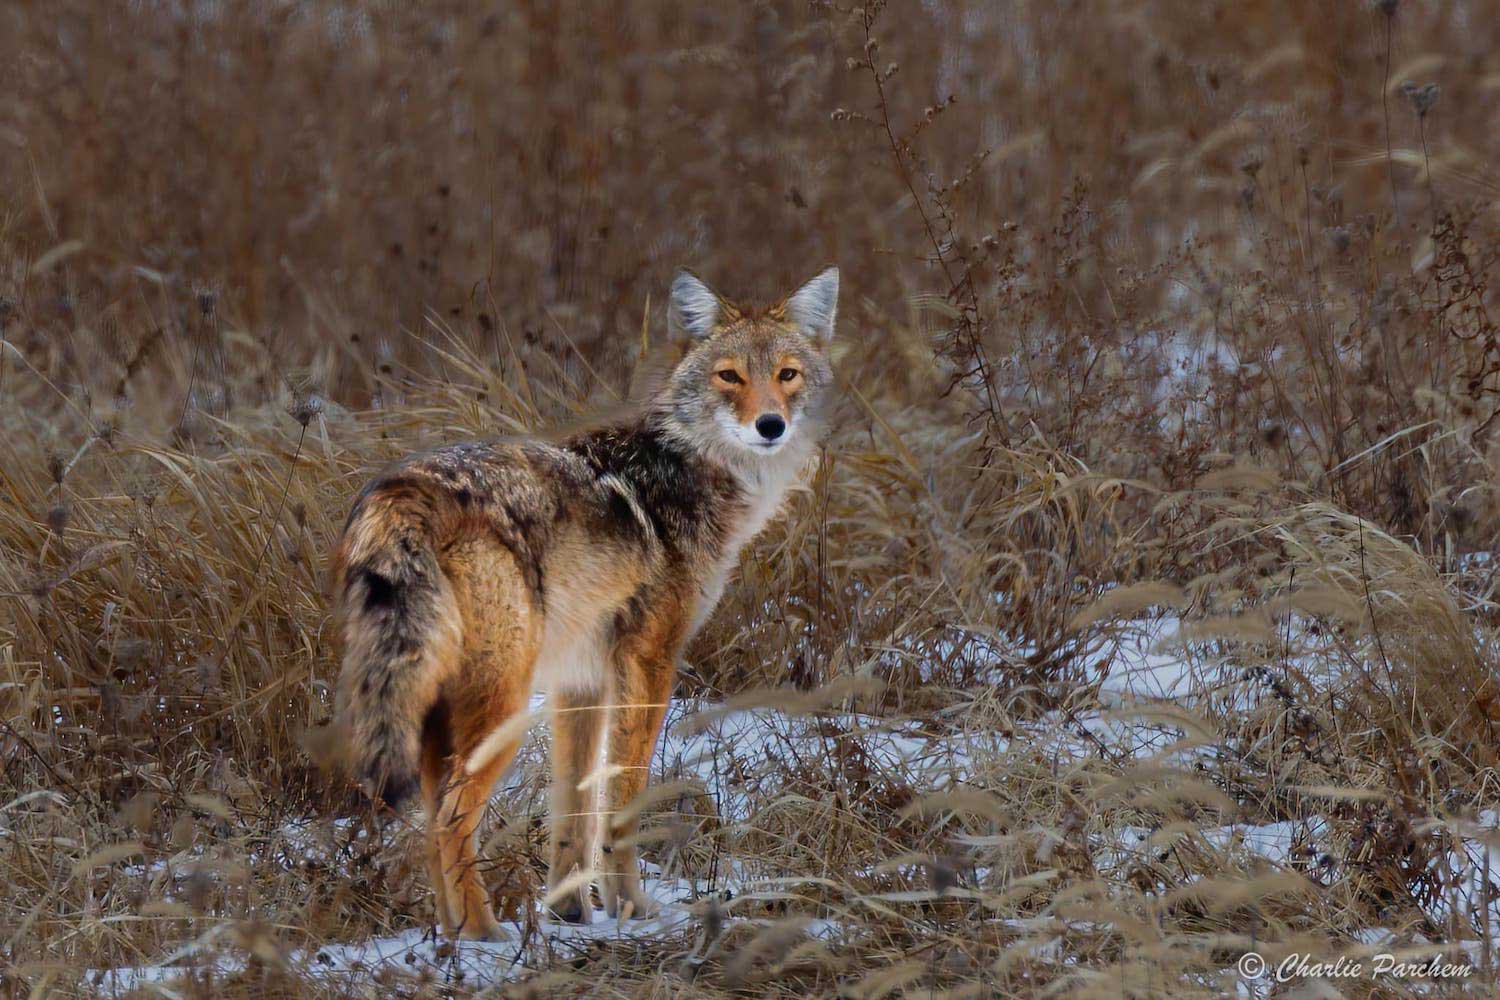 A coyote standing in dried grasses with snow on the ground.